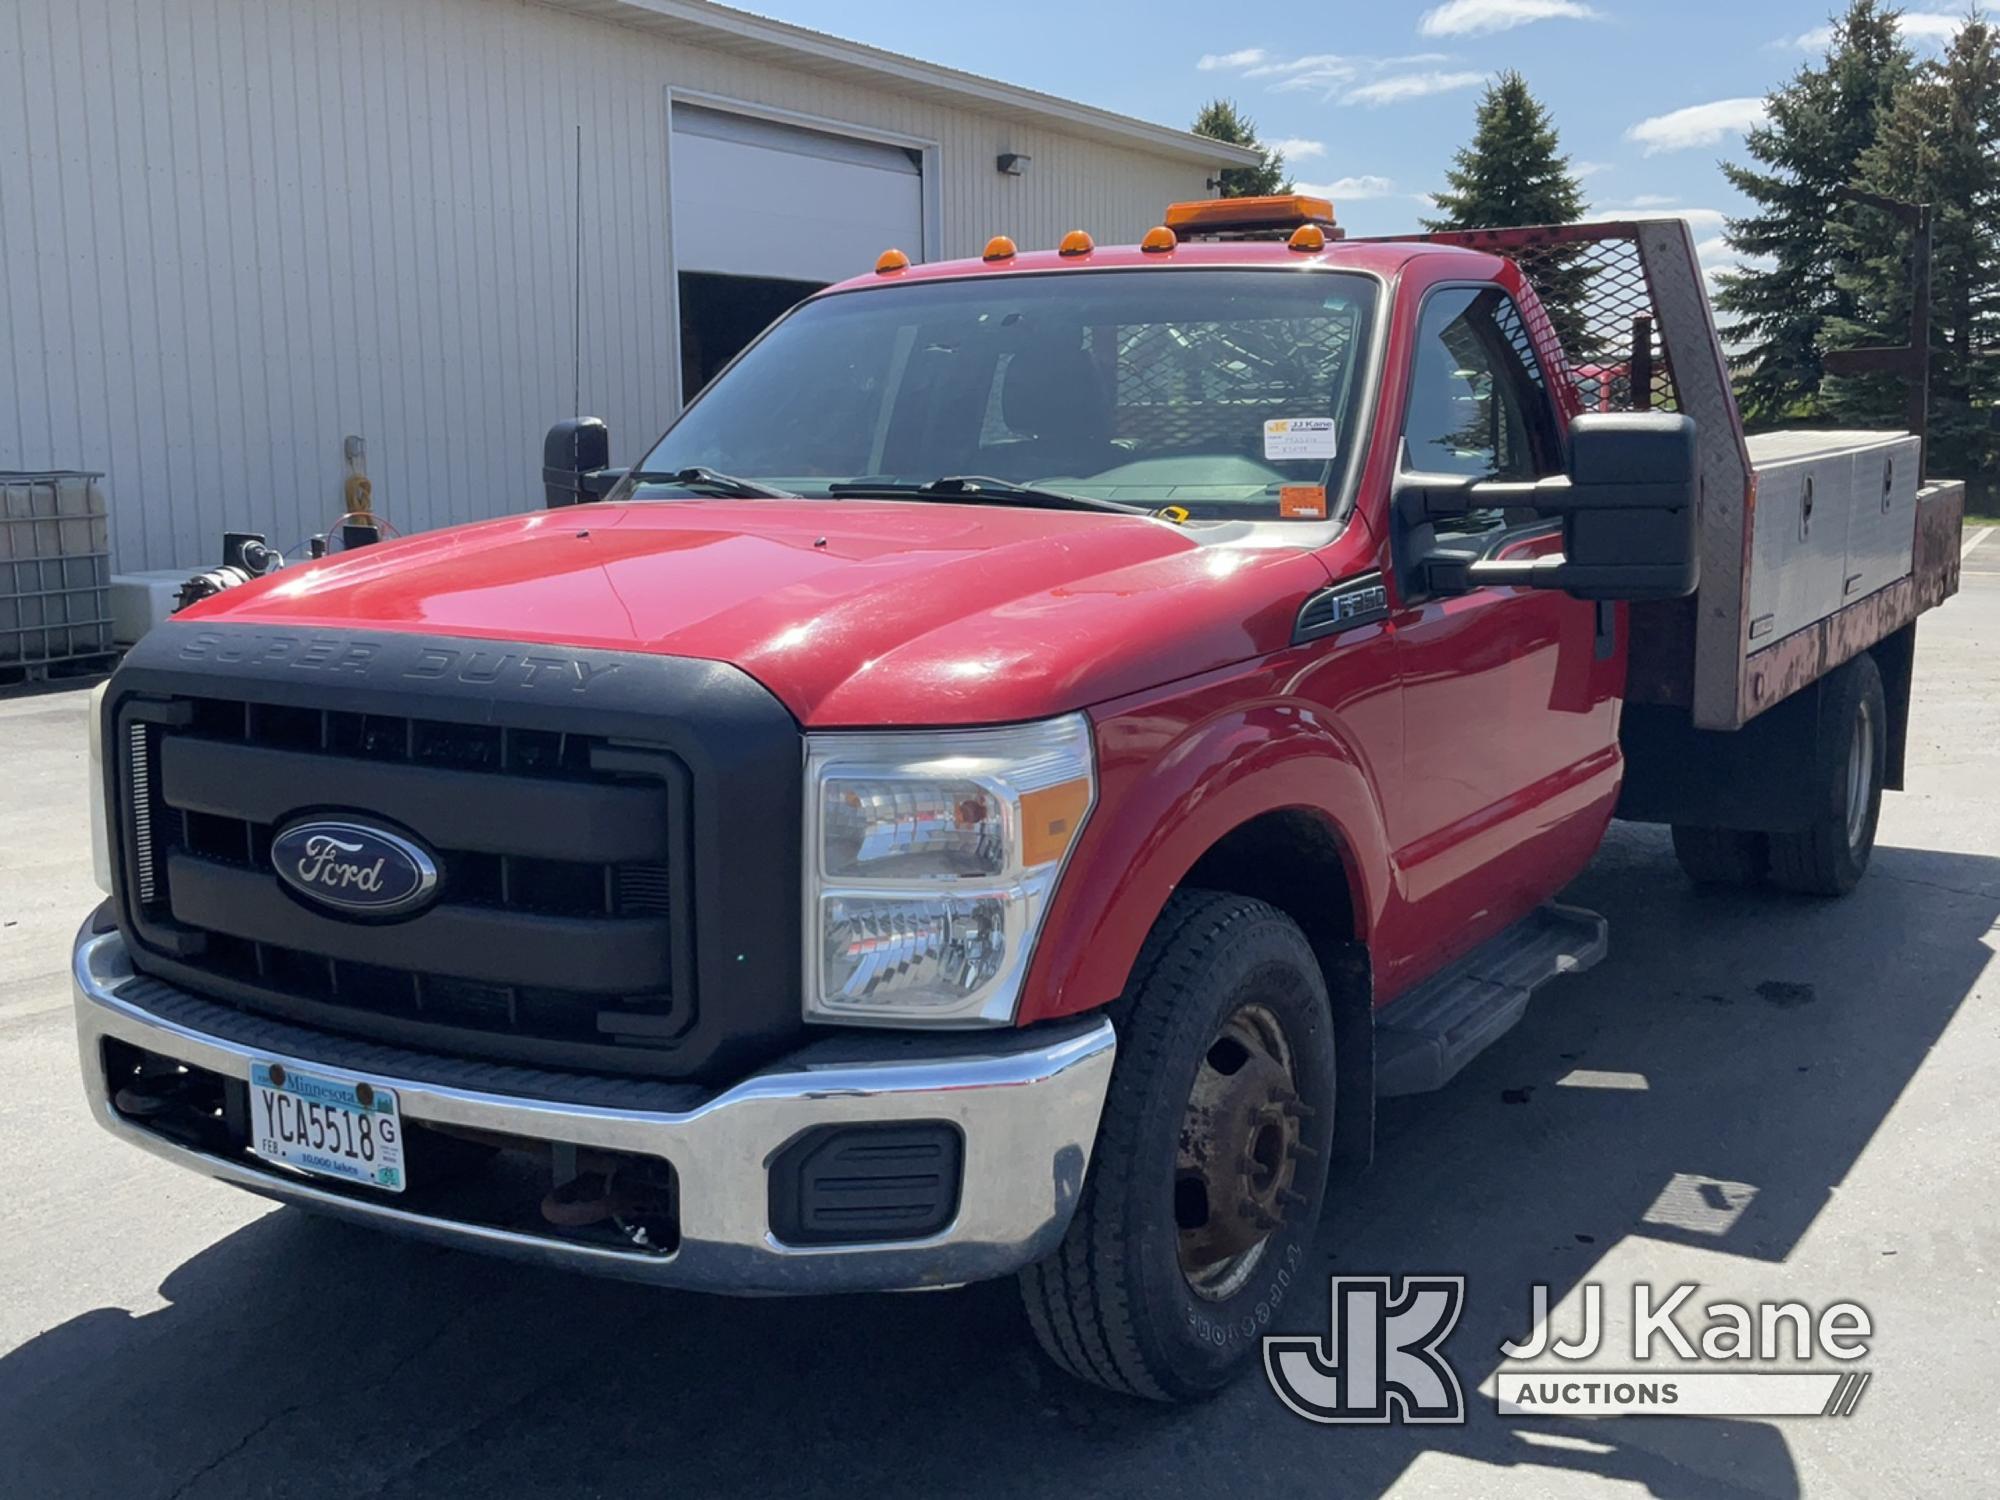 (Maple Lake, MN) 2013 Ford F350 Flatbed Truck Runs, Moves, Operates.